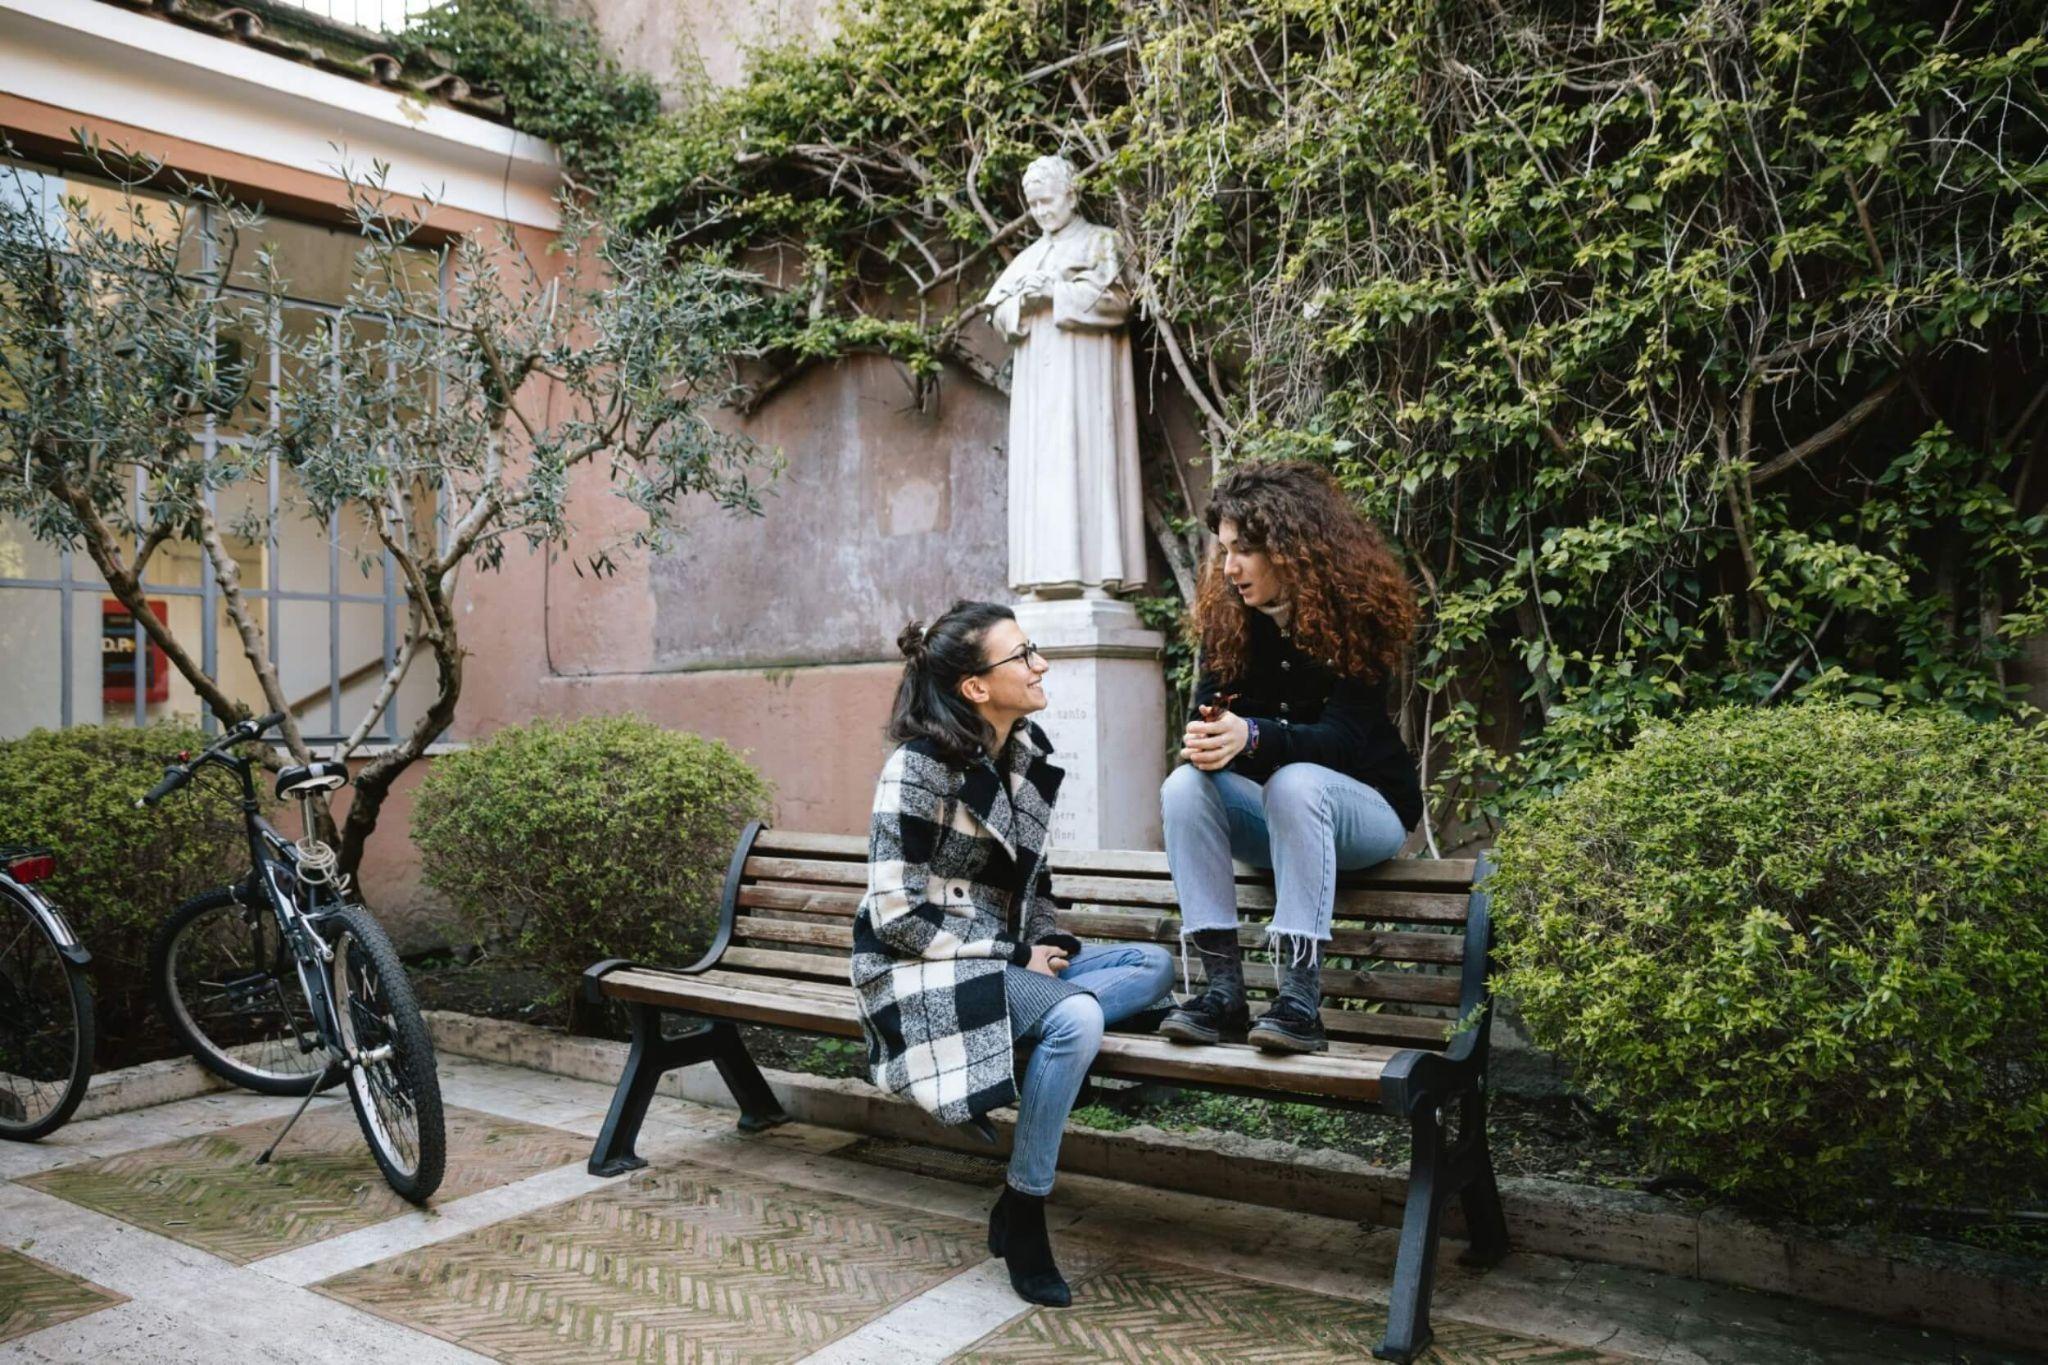 Two JCU students are discussing outside while studying entrepreneurship in Rome.